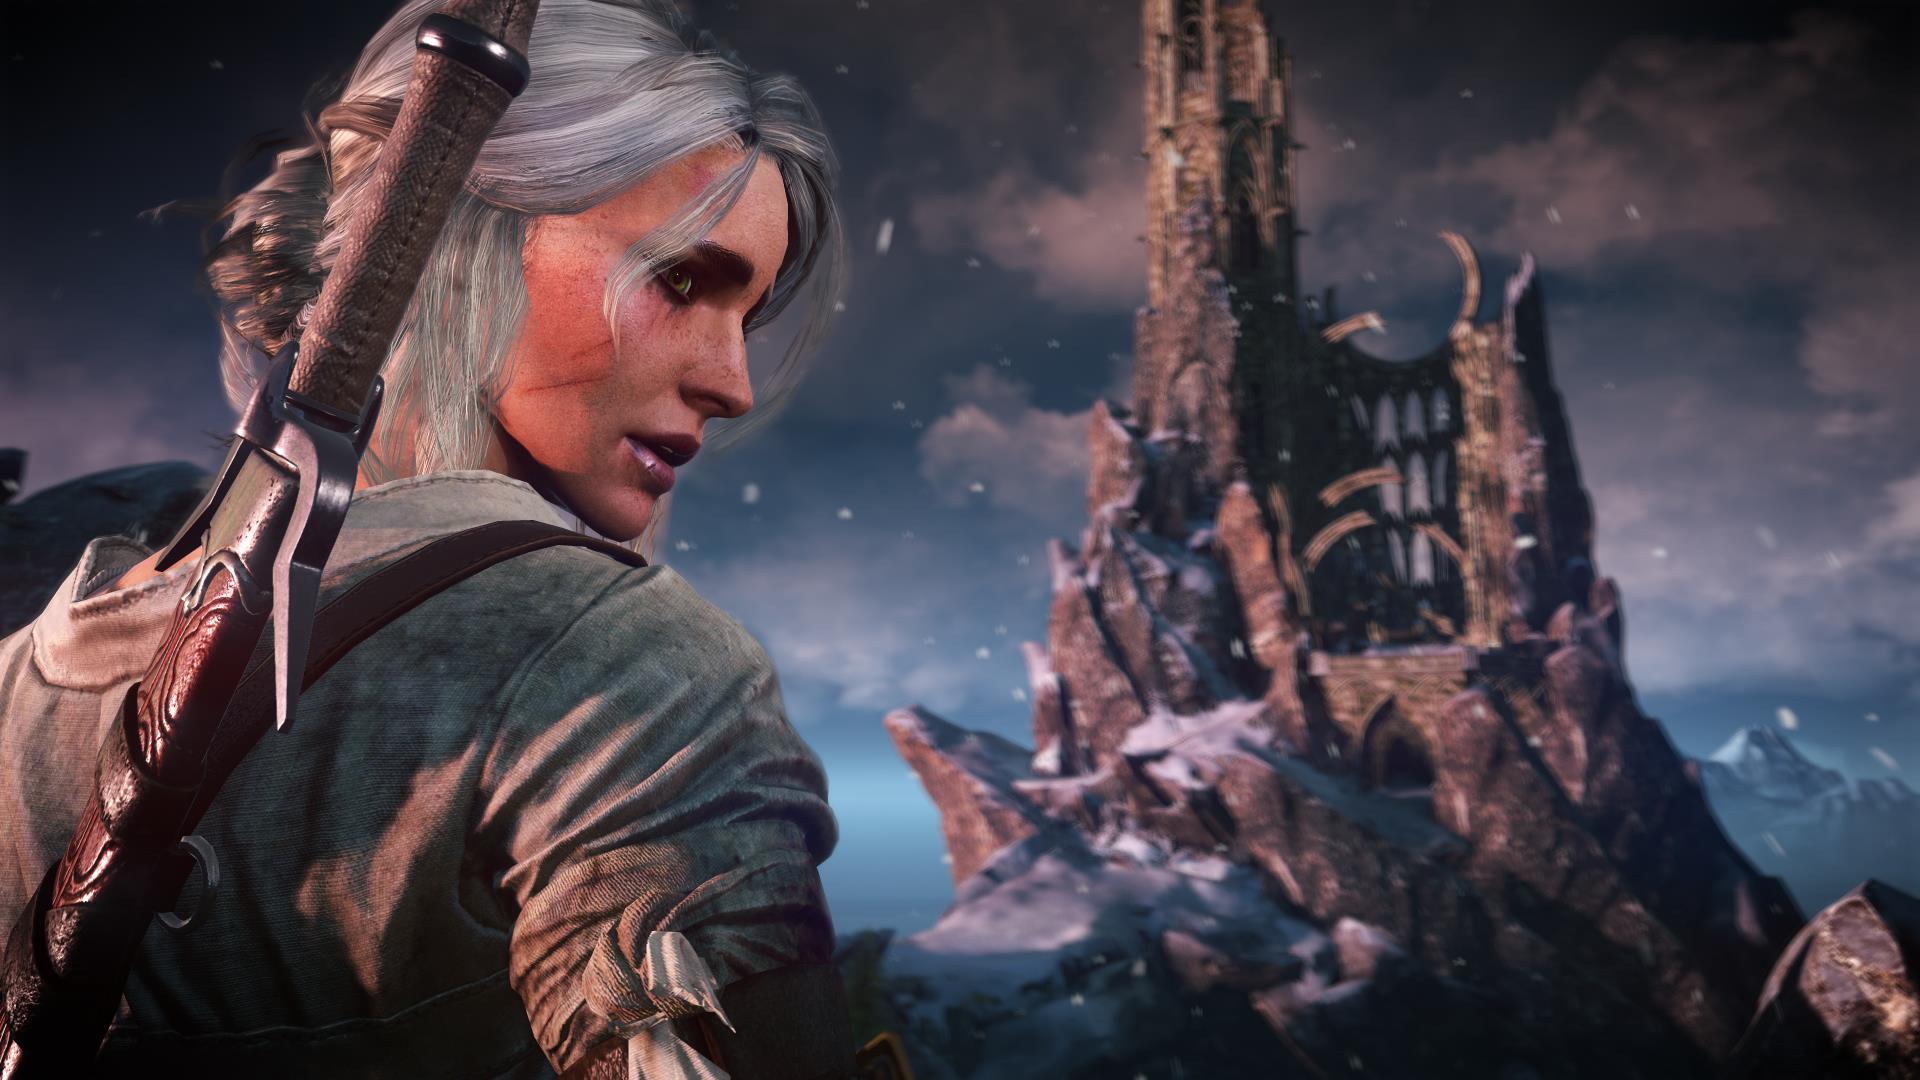 Image for “Maybe [Ciri’s story is] something we’ll get to get back to in the future,” says CD Projekt Red